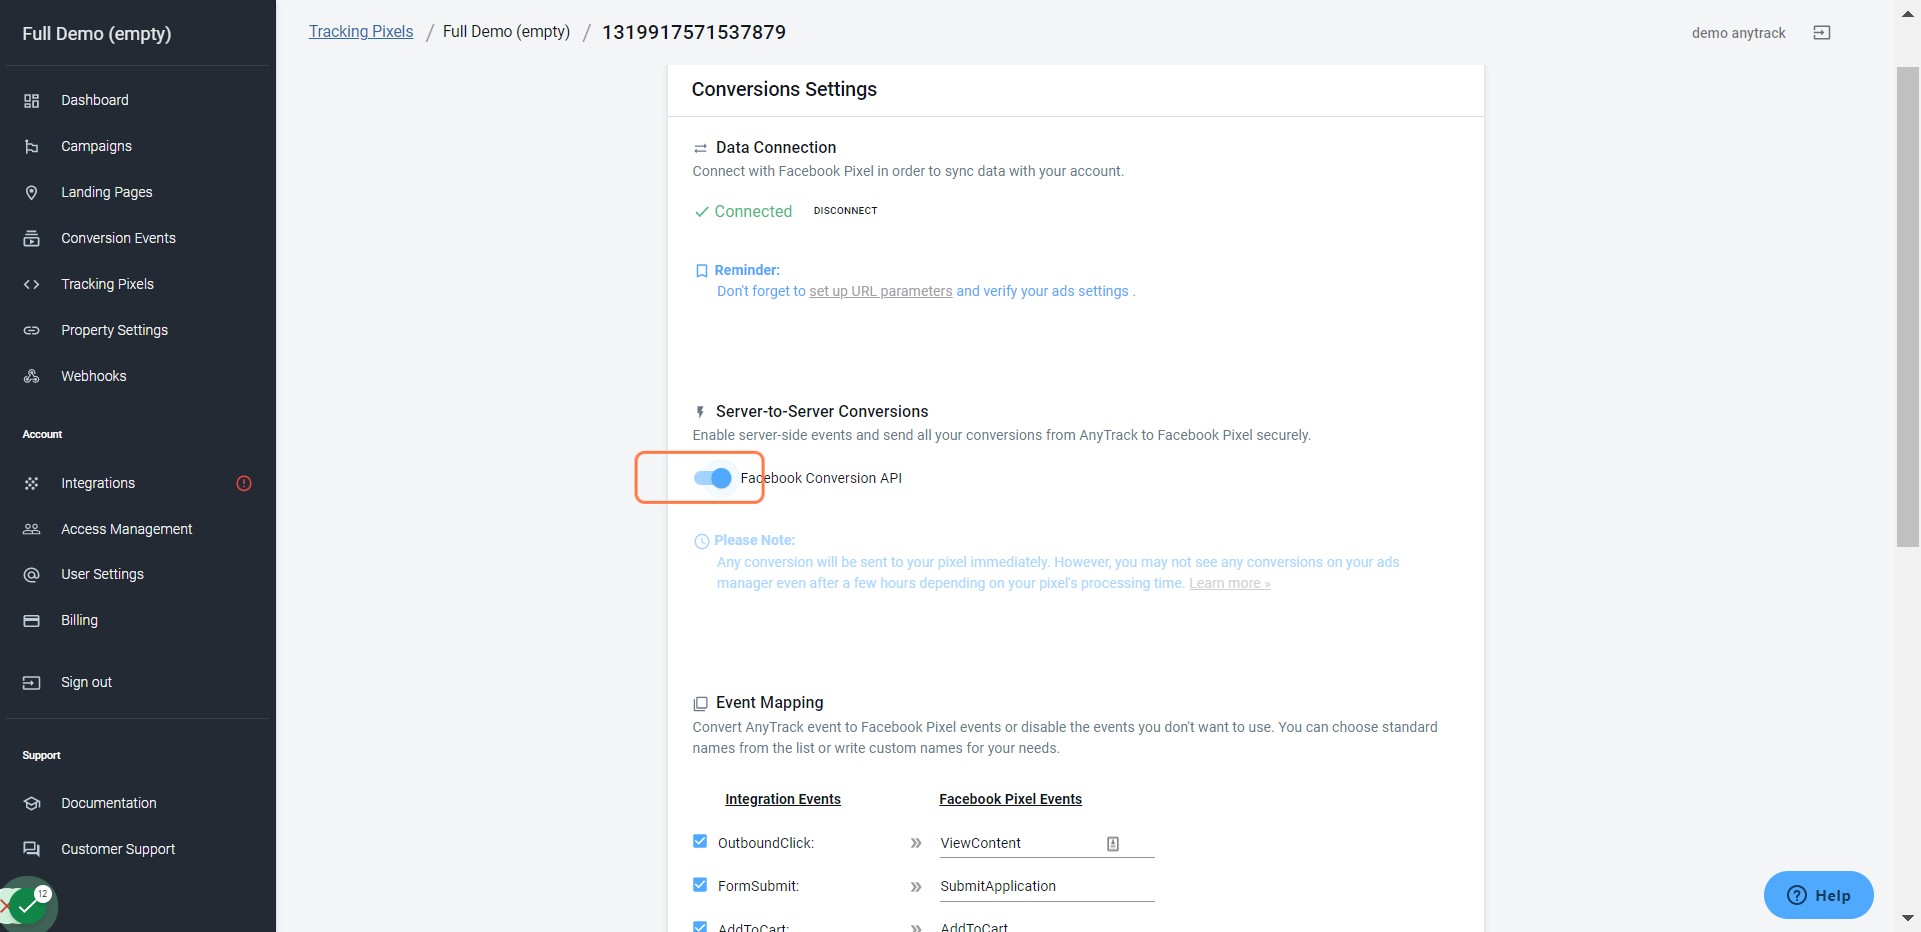 Now enable the  facebook conversion api integration